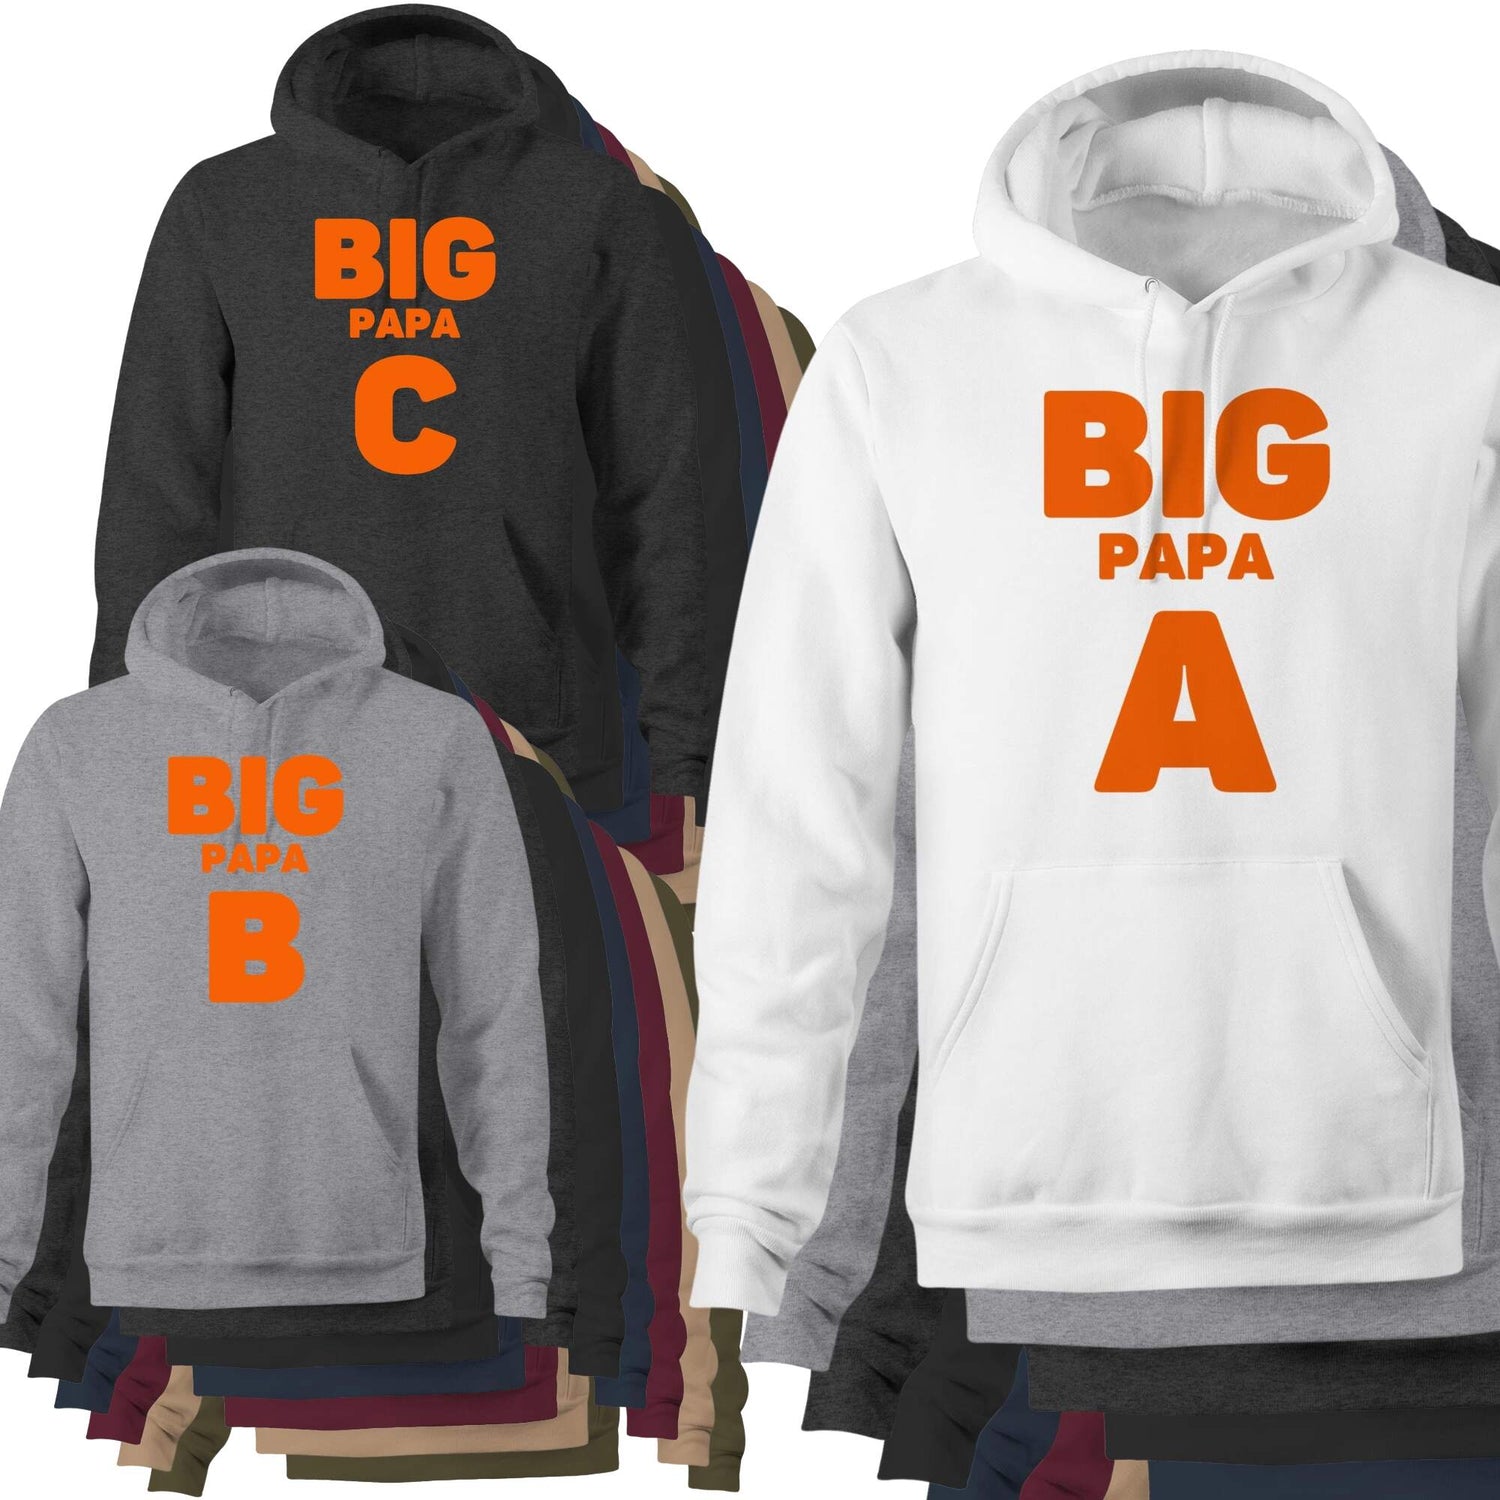 Big Papa Hoodies A - Z for all dads according to their initials - Variety of colours and sizes - Da Boss Mango